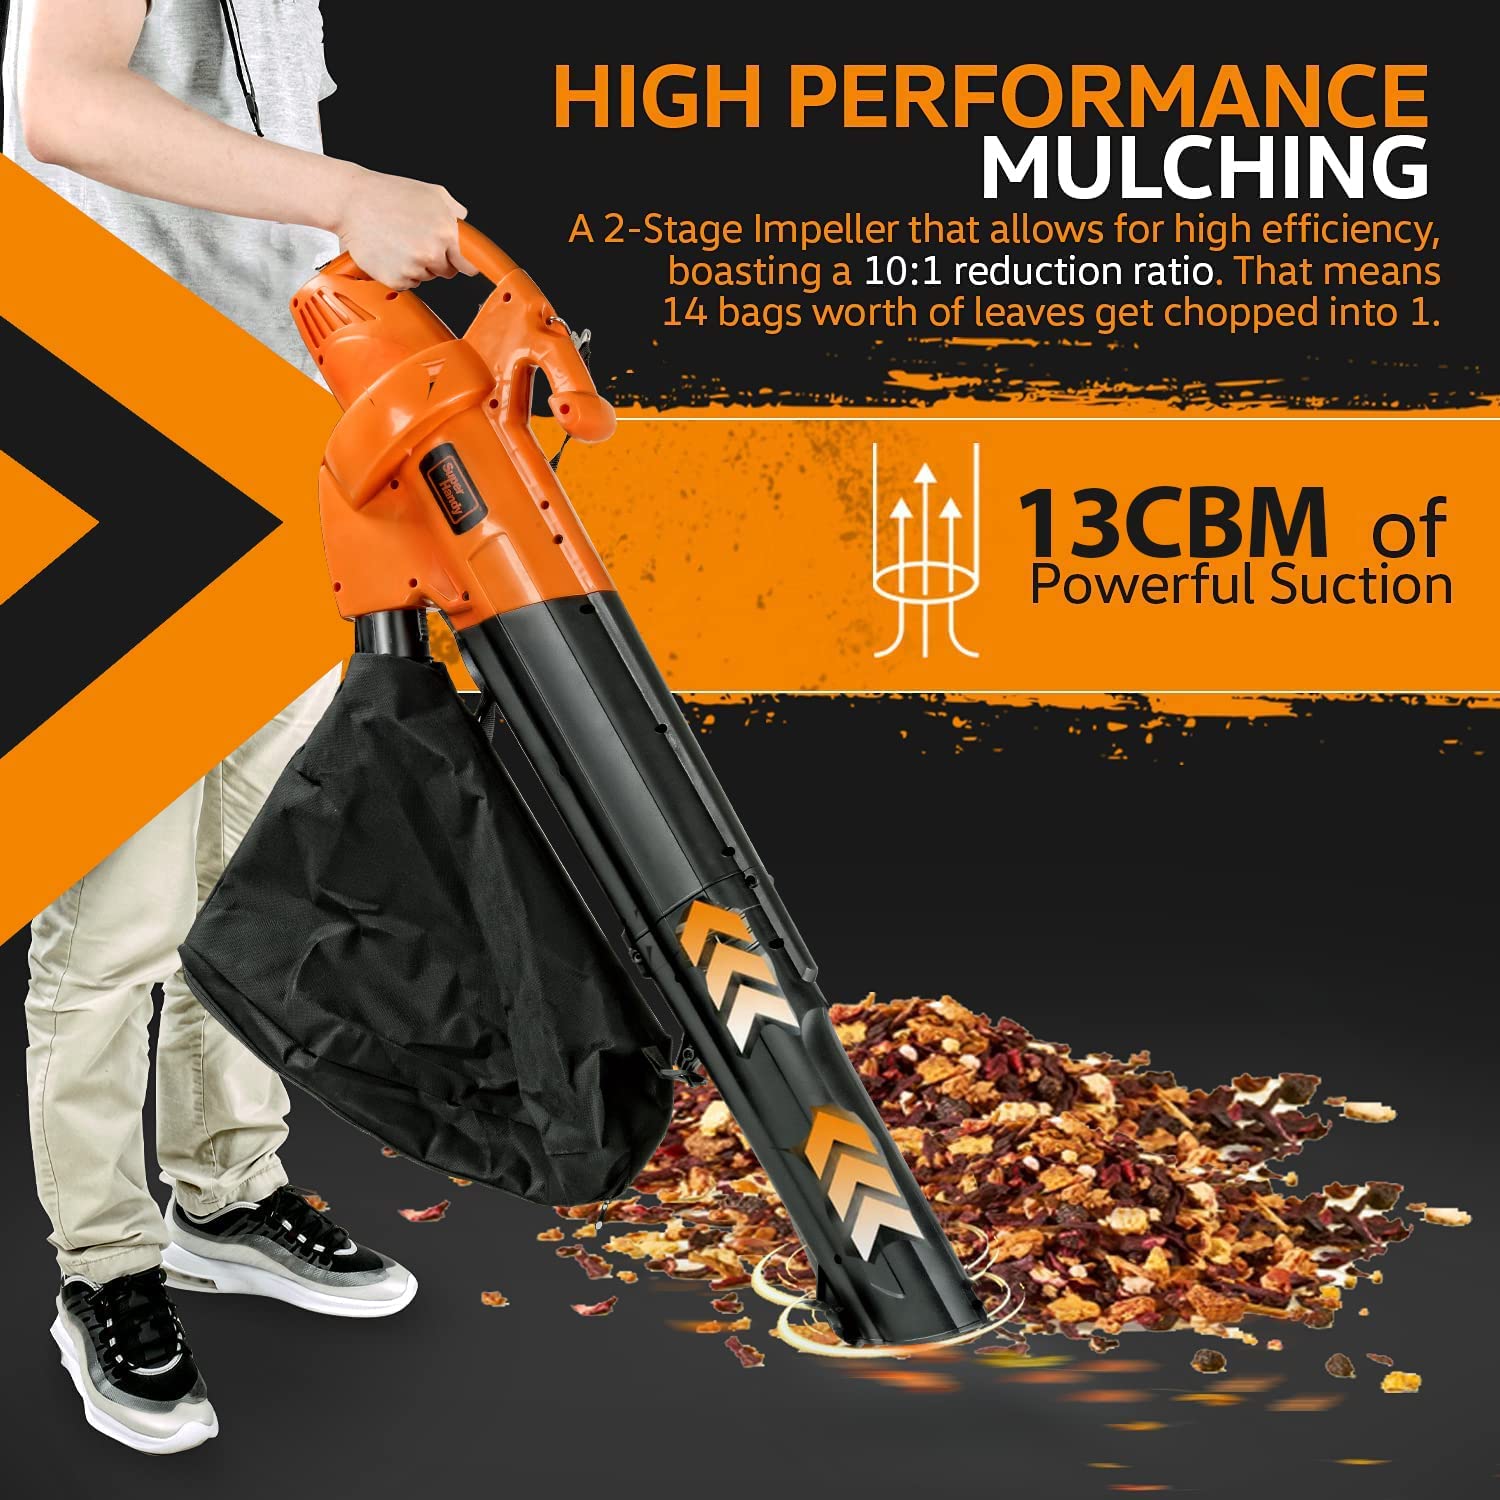 SuperHandy 3 in 1 Leaf Blower, Vacuum and Mulcher Electric 230V 12-Amp Corded Debris Duster 220MPH